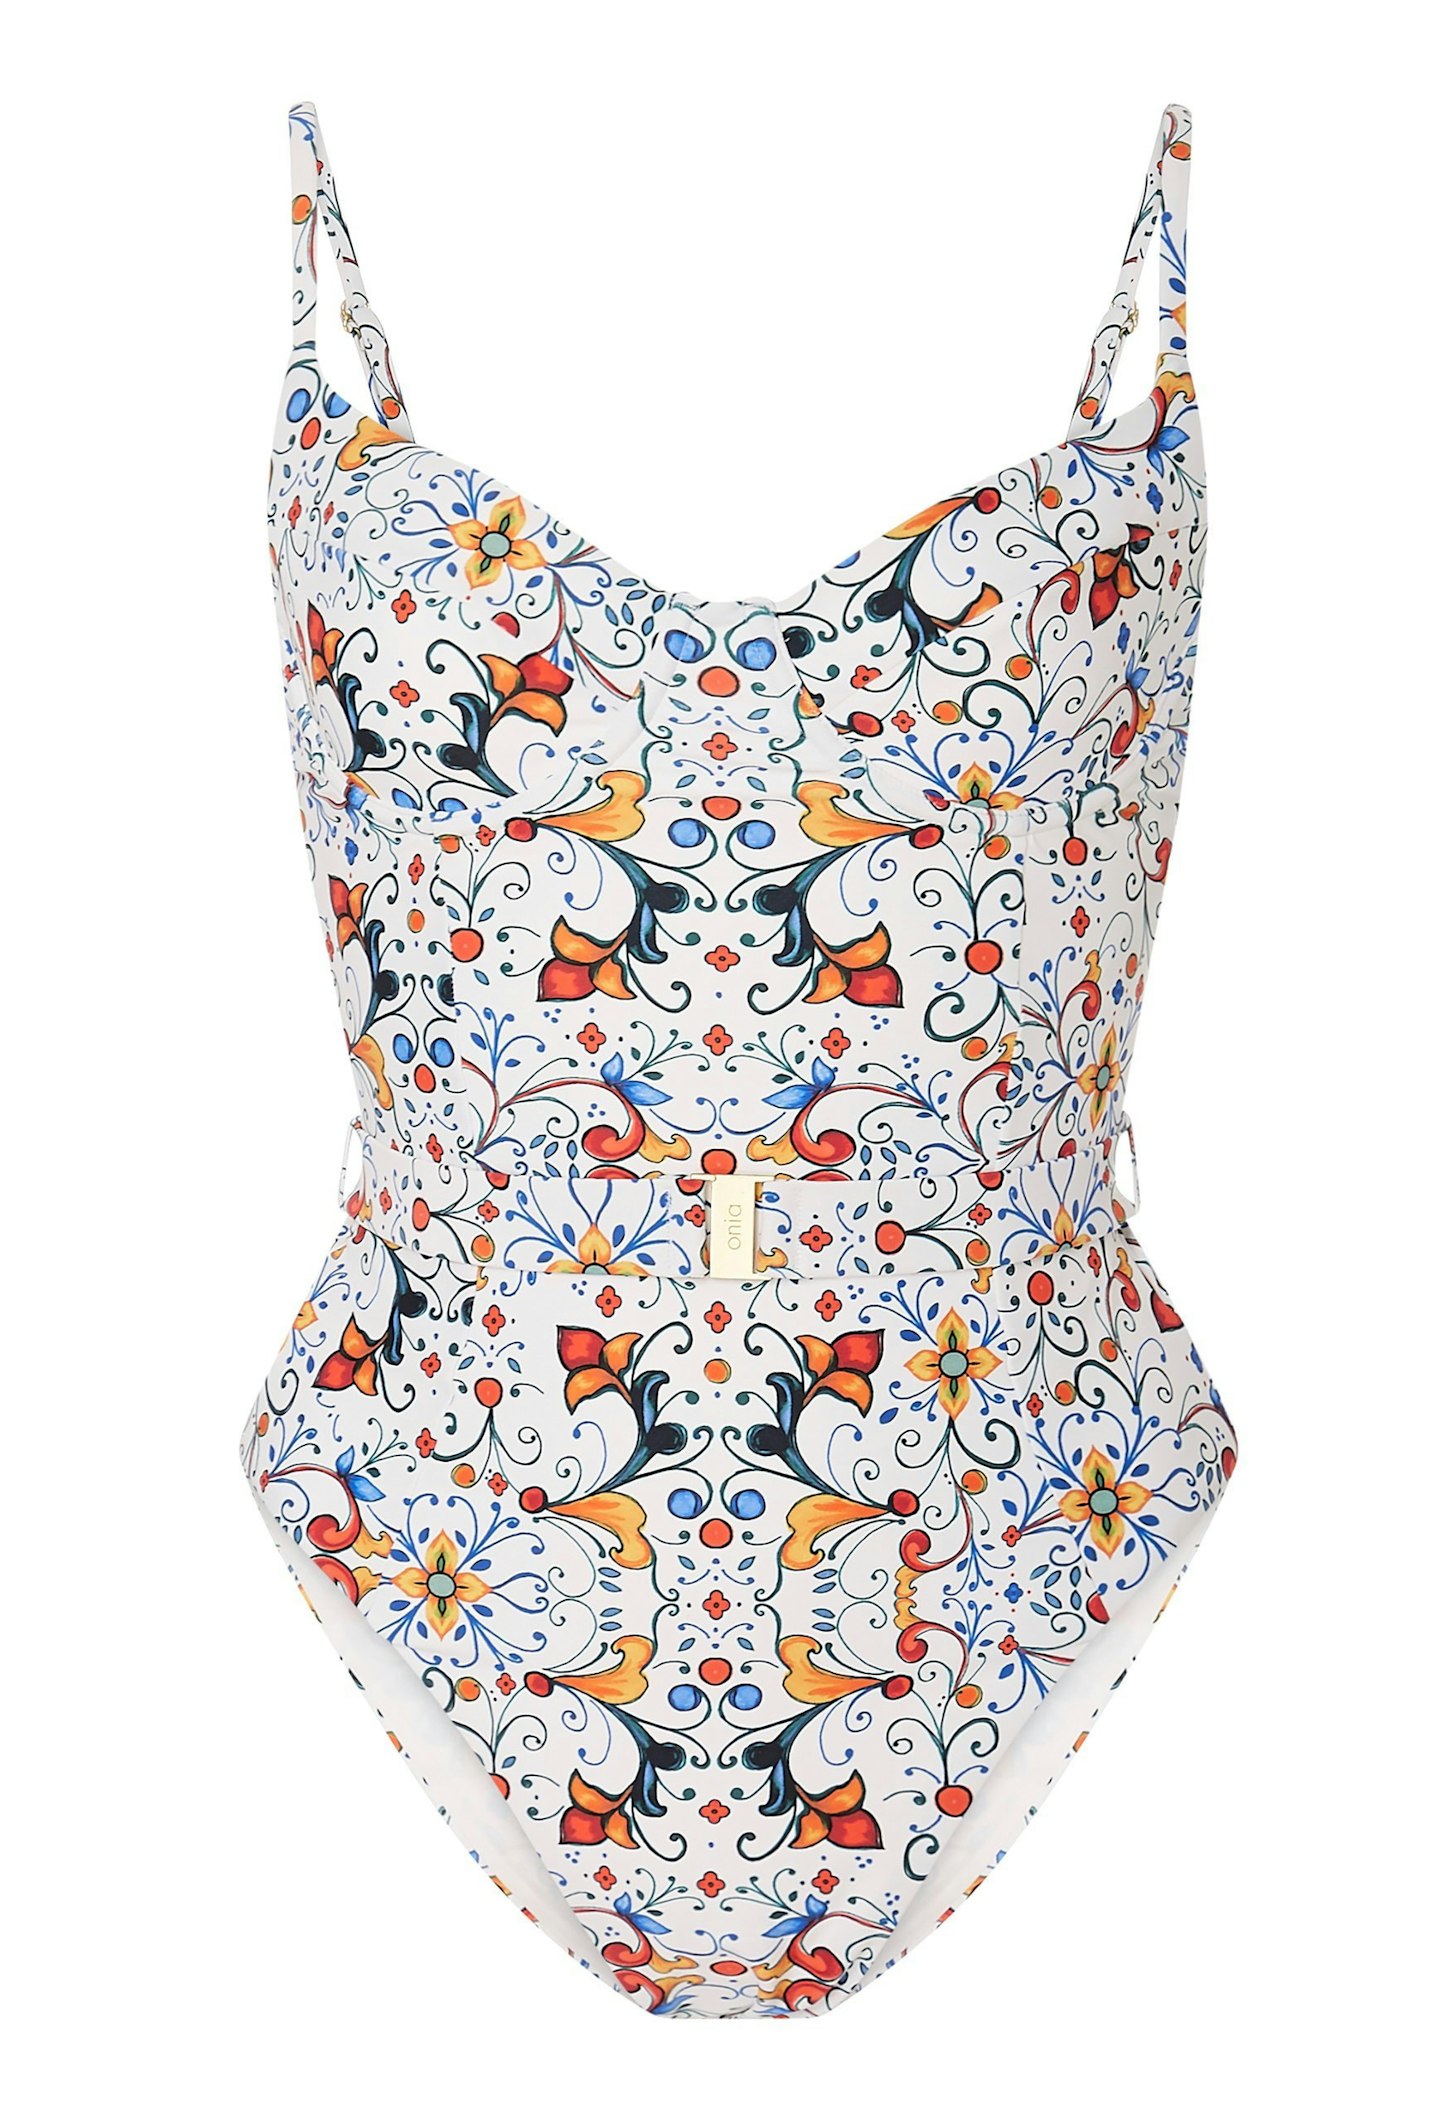 ONIA X WEWOREWHAT, Delicate Tile Print Danielle One Piece, £180